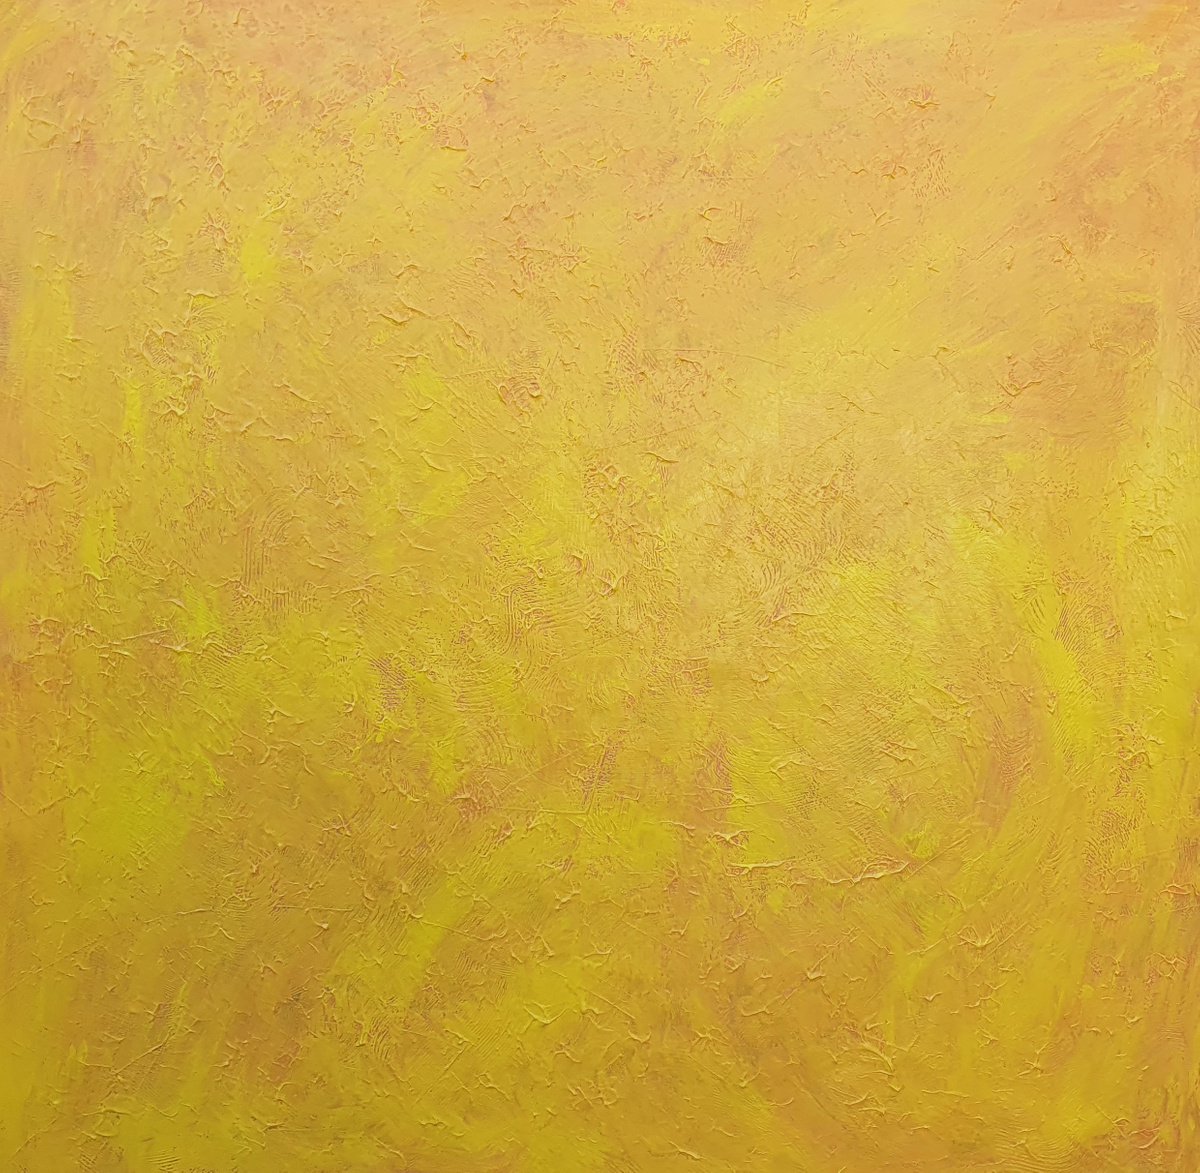 The Sun vibrations - yellow - orange abstract by Ivana Olbricht